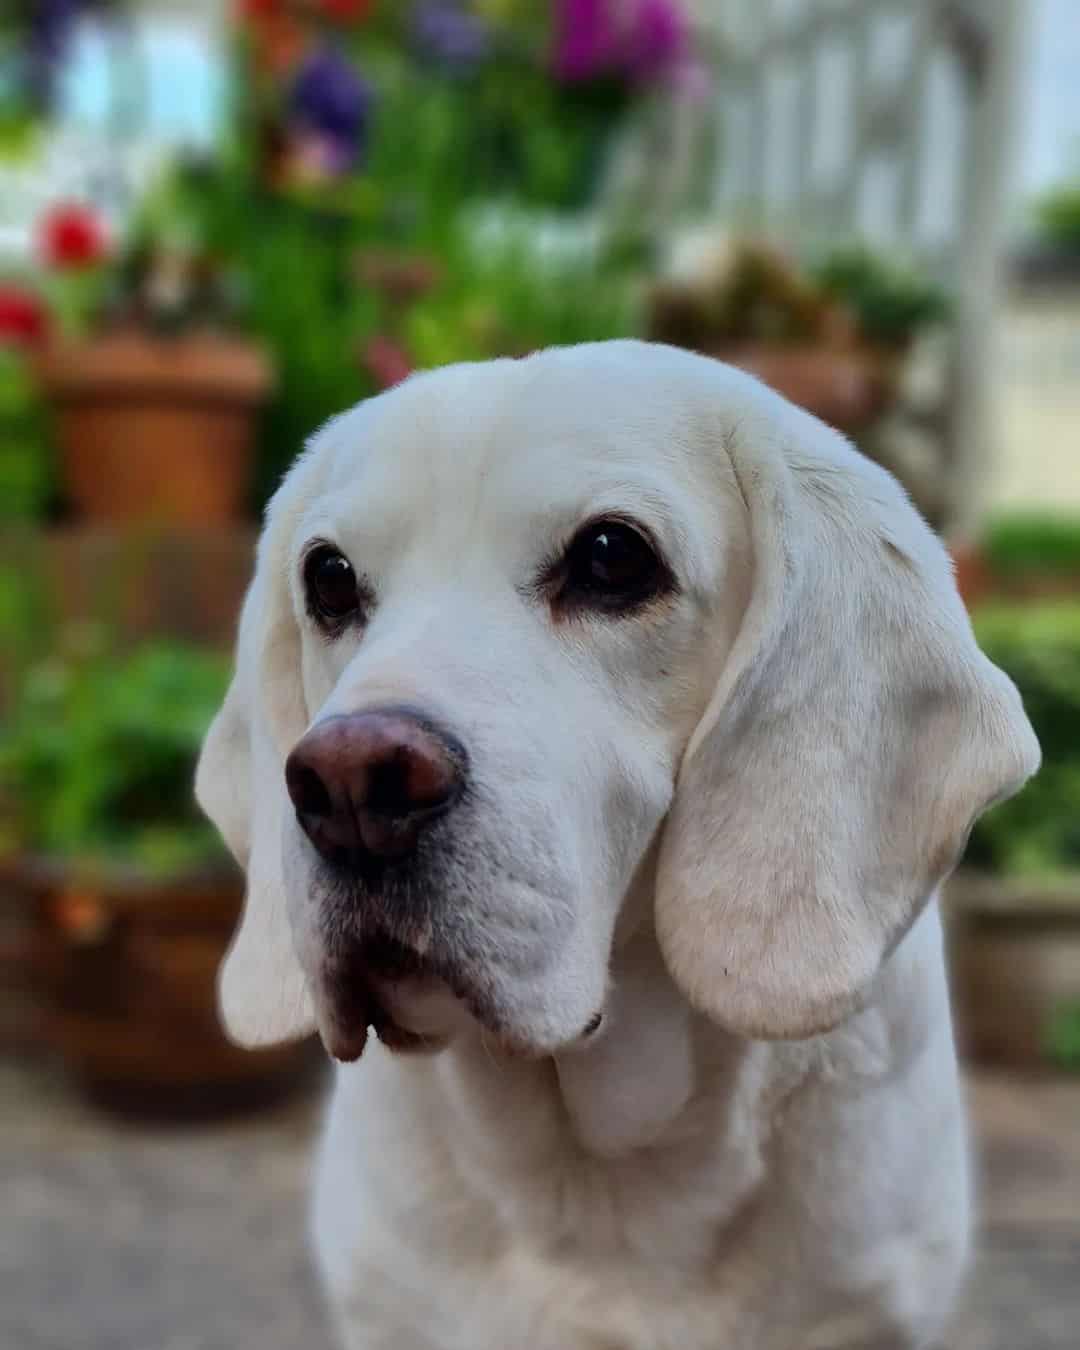 White Beagle stands and looks ahead